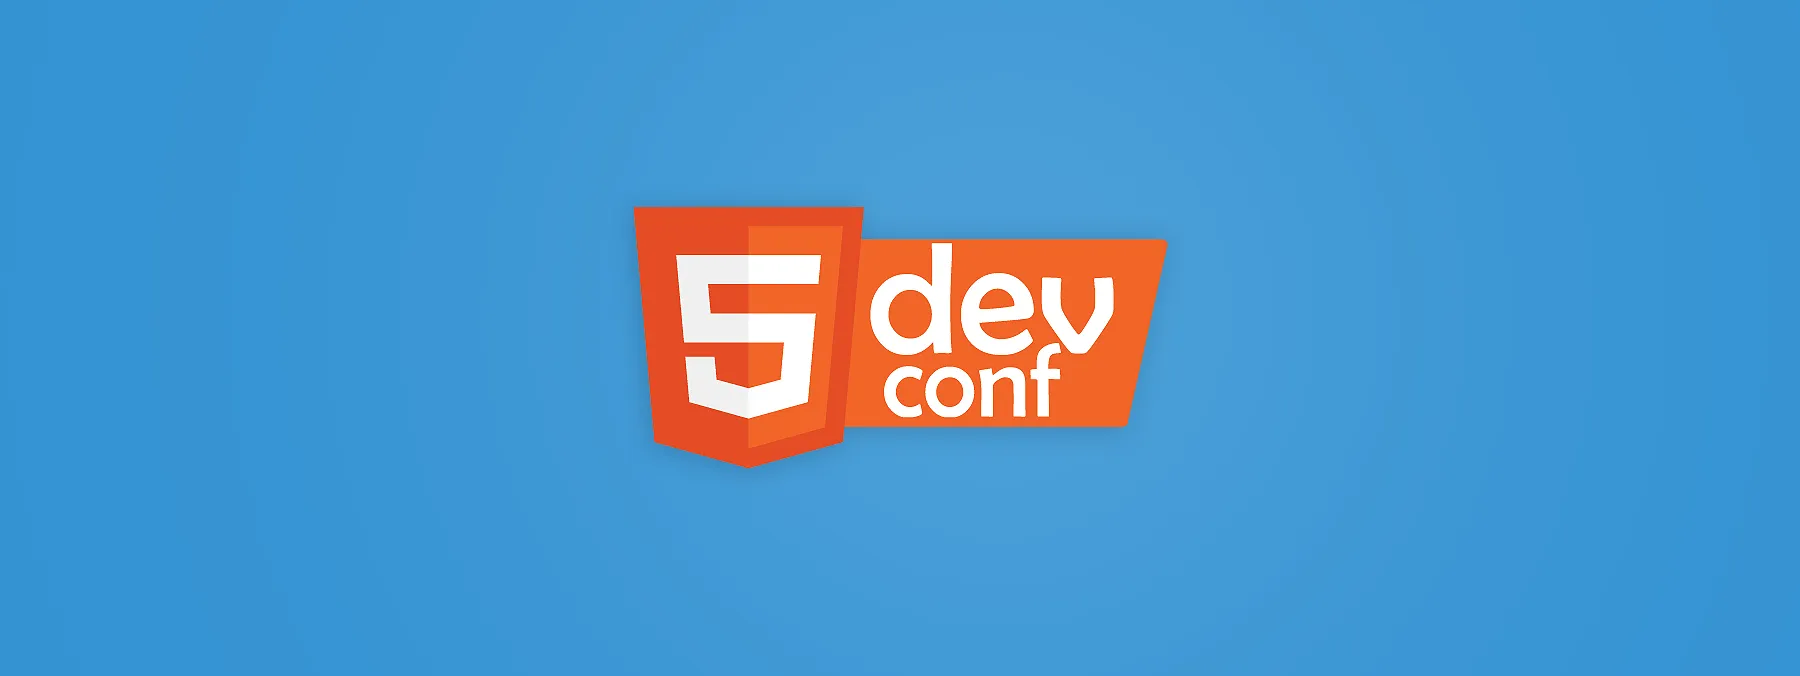 Join the HTML5 Developer Conference 2014 with Mozilla and Opera this summer in Kerala.